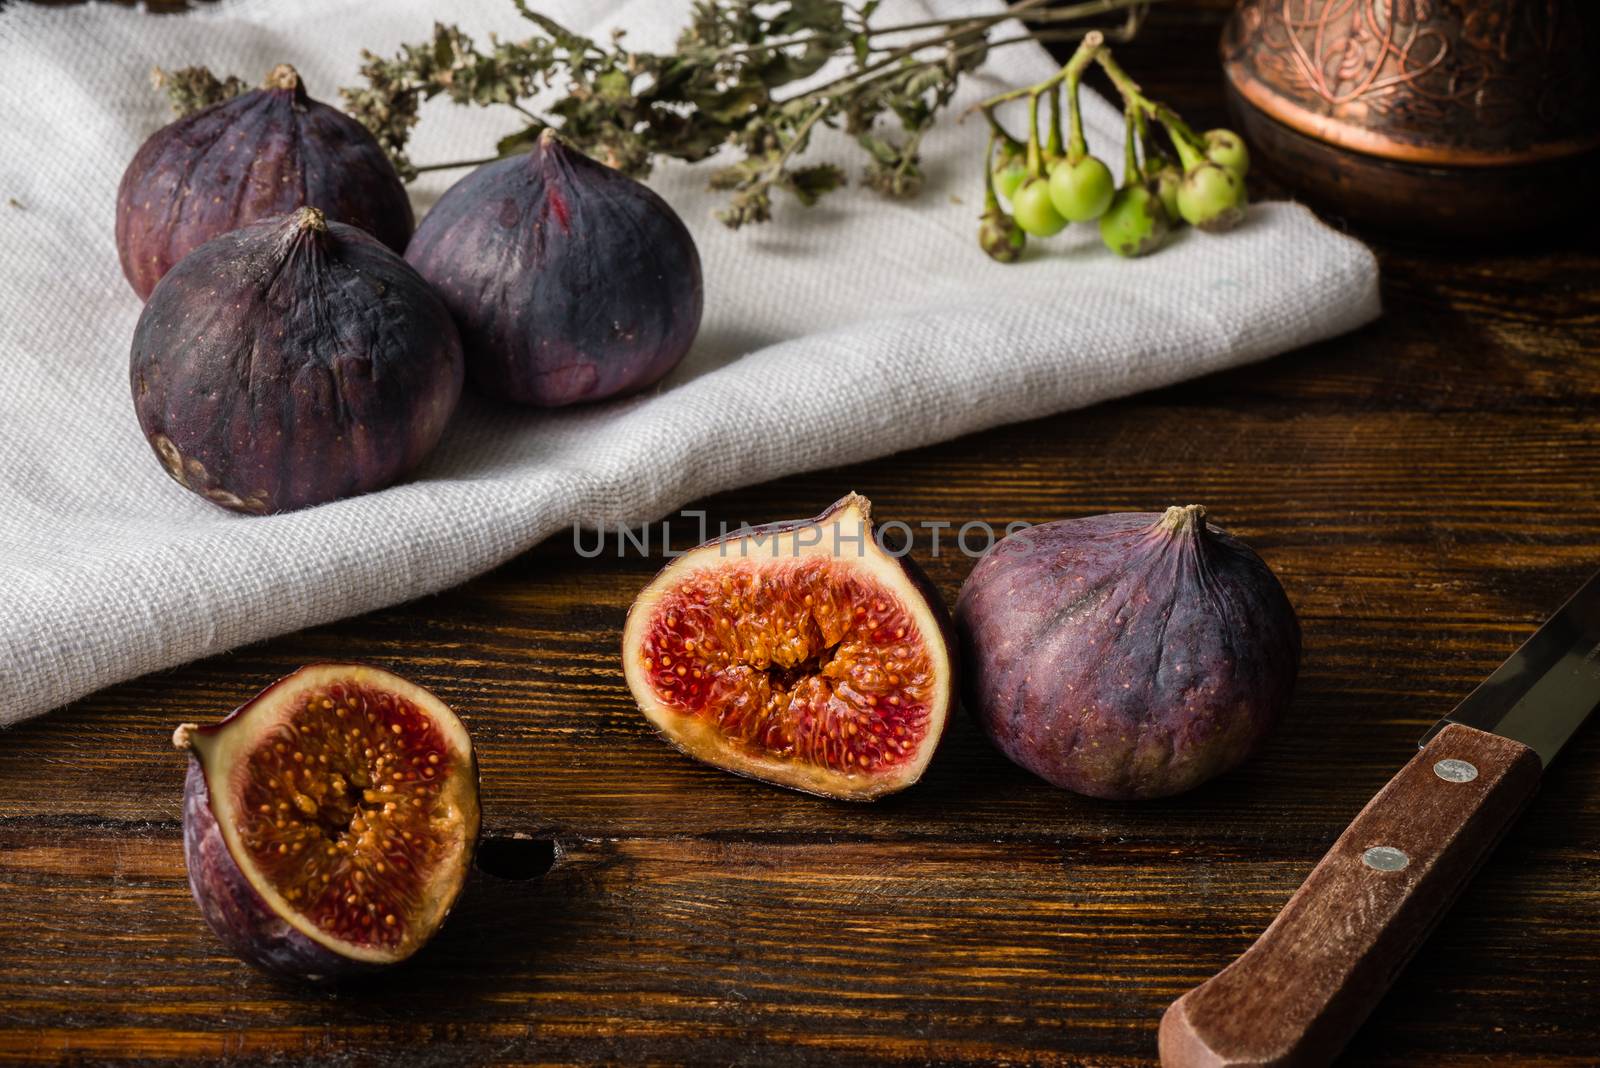 Ripe seasonal figs on the cloth and wooden surface with sliced one and some objects